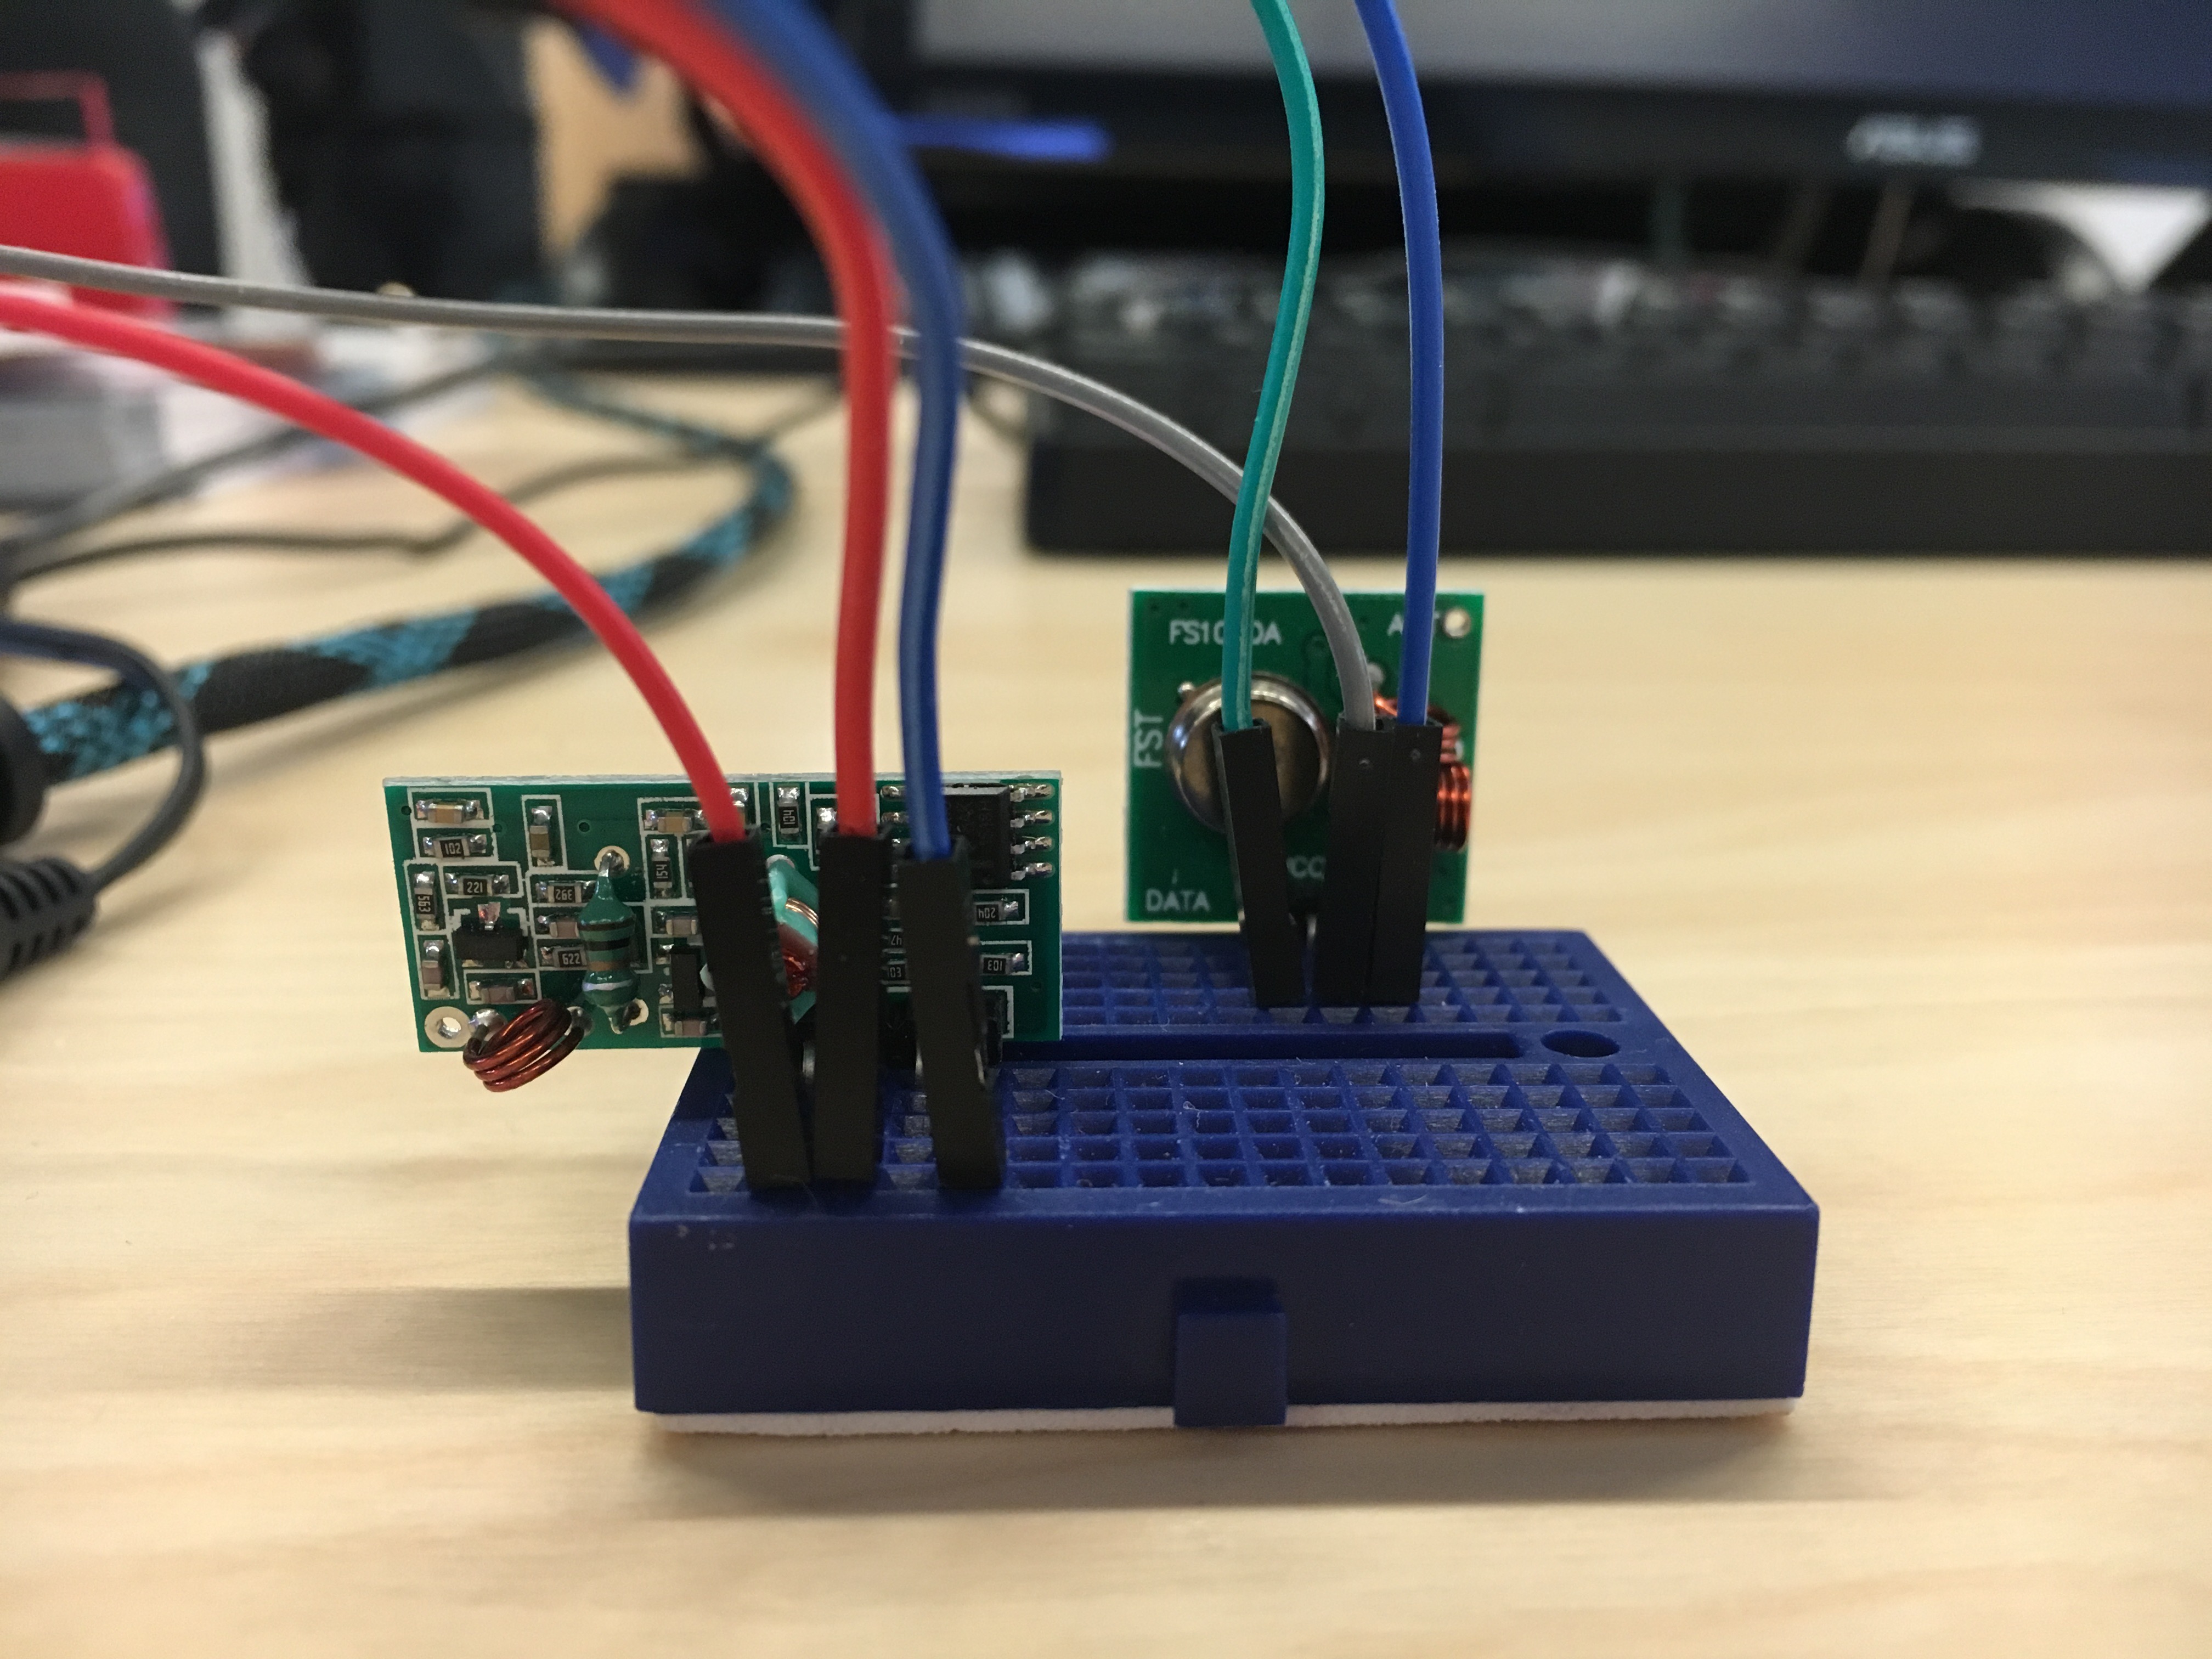 Controlling RF outlets from a Raspberry Pi - chester's blog